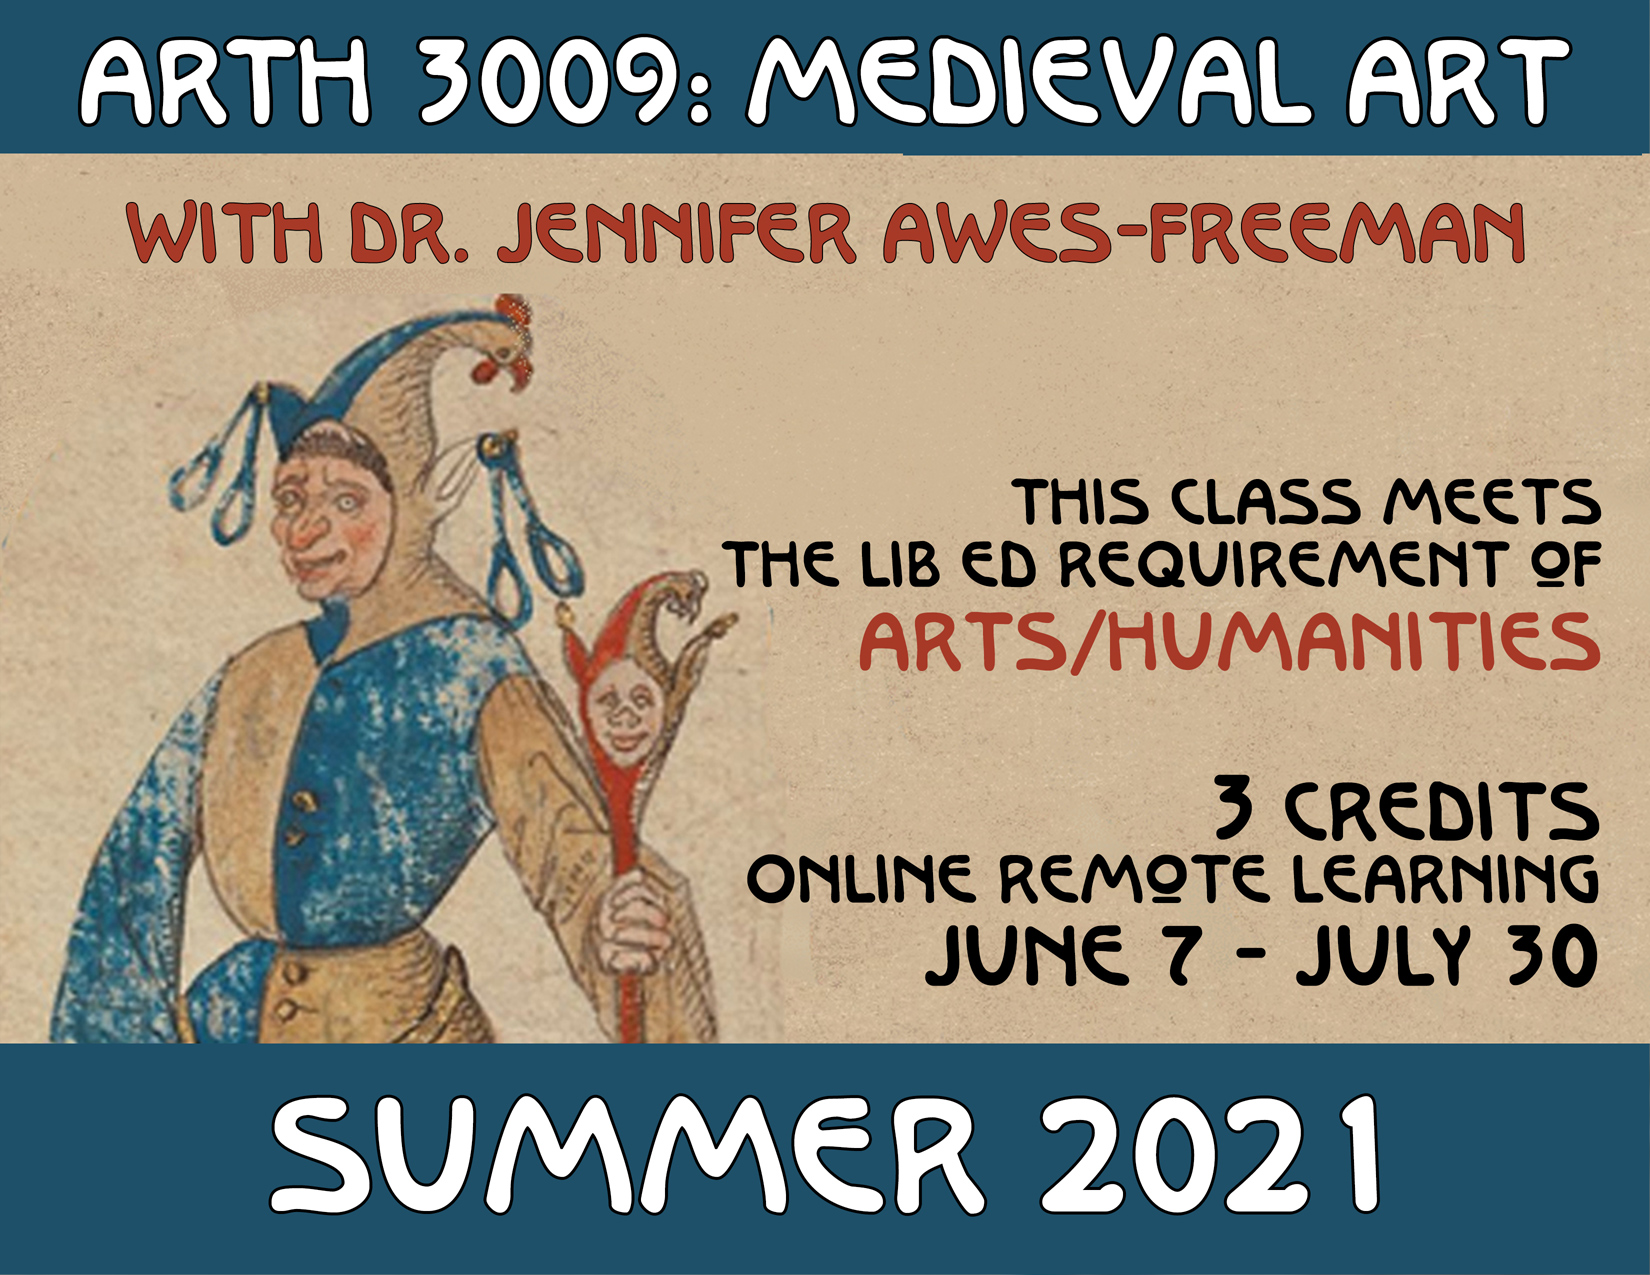 Poster for ARTH 3009 Medieval Art showing a court jester and the class details